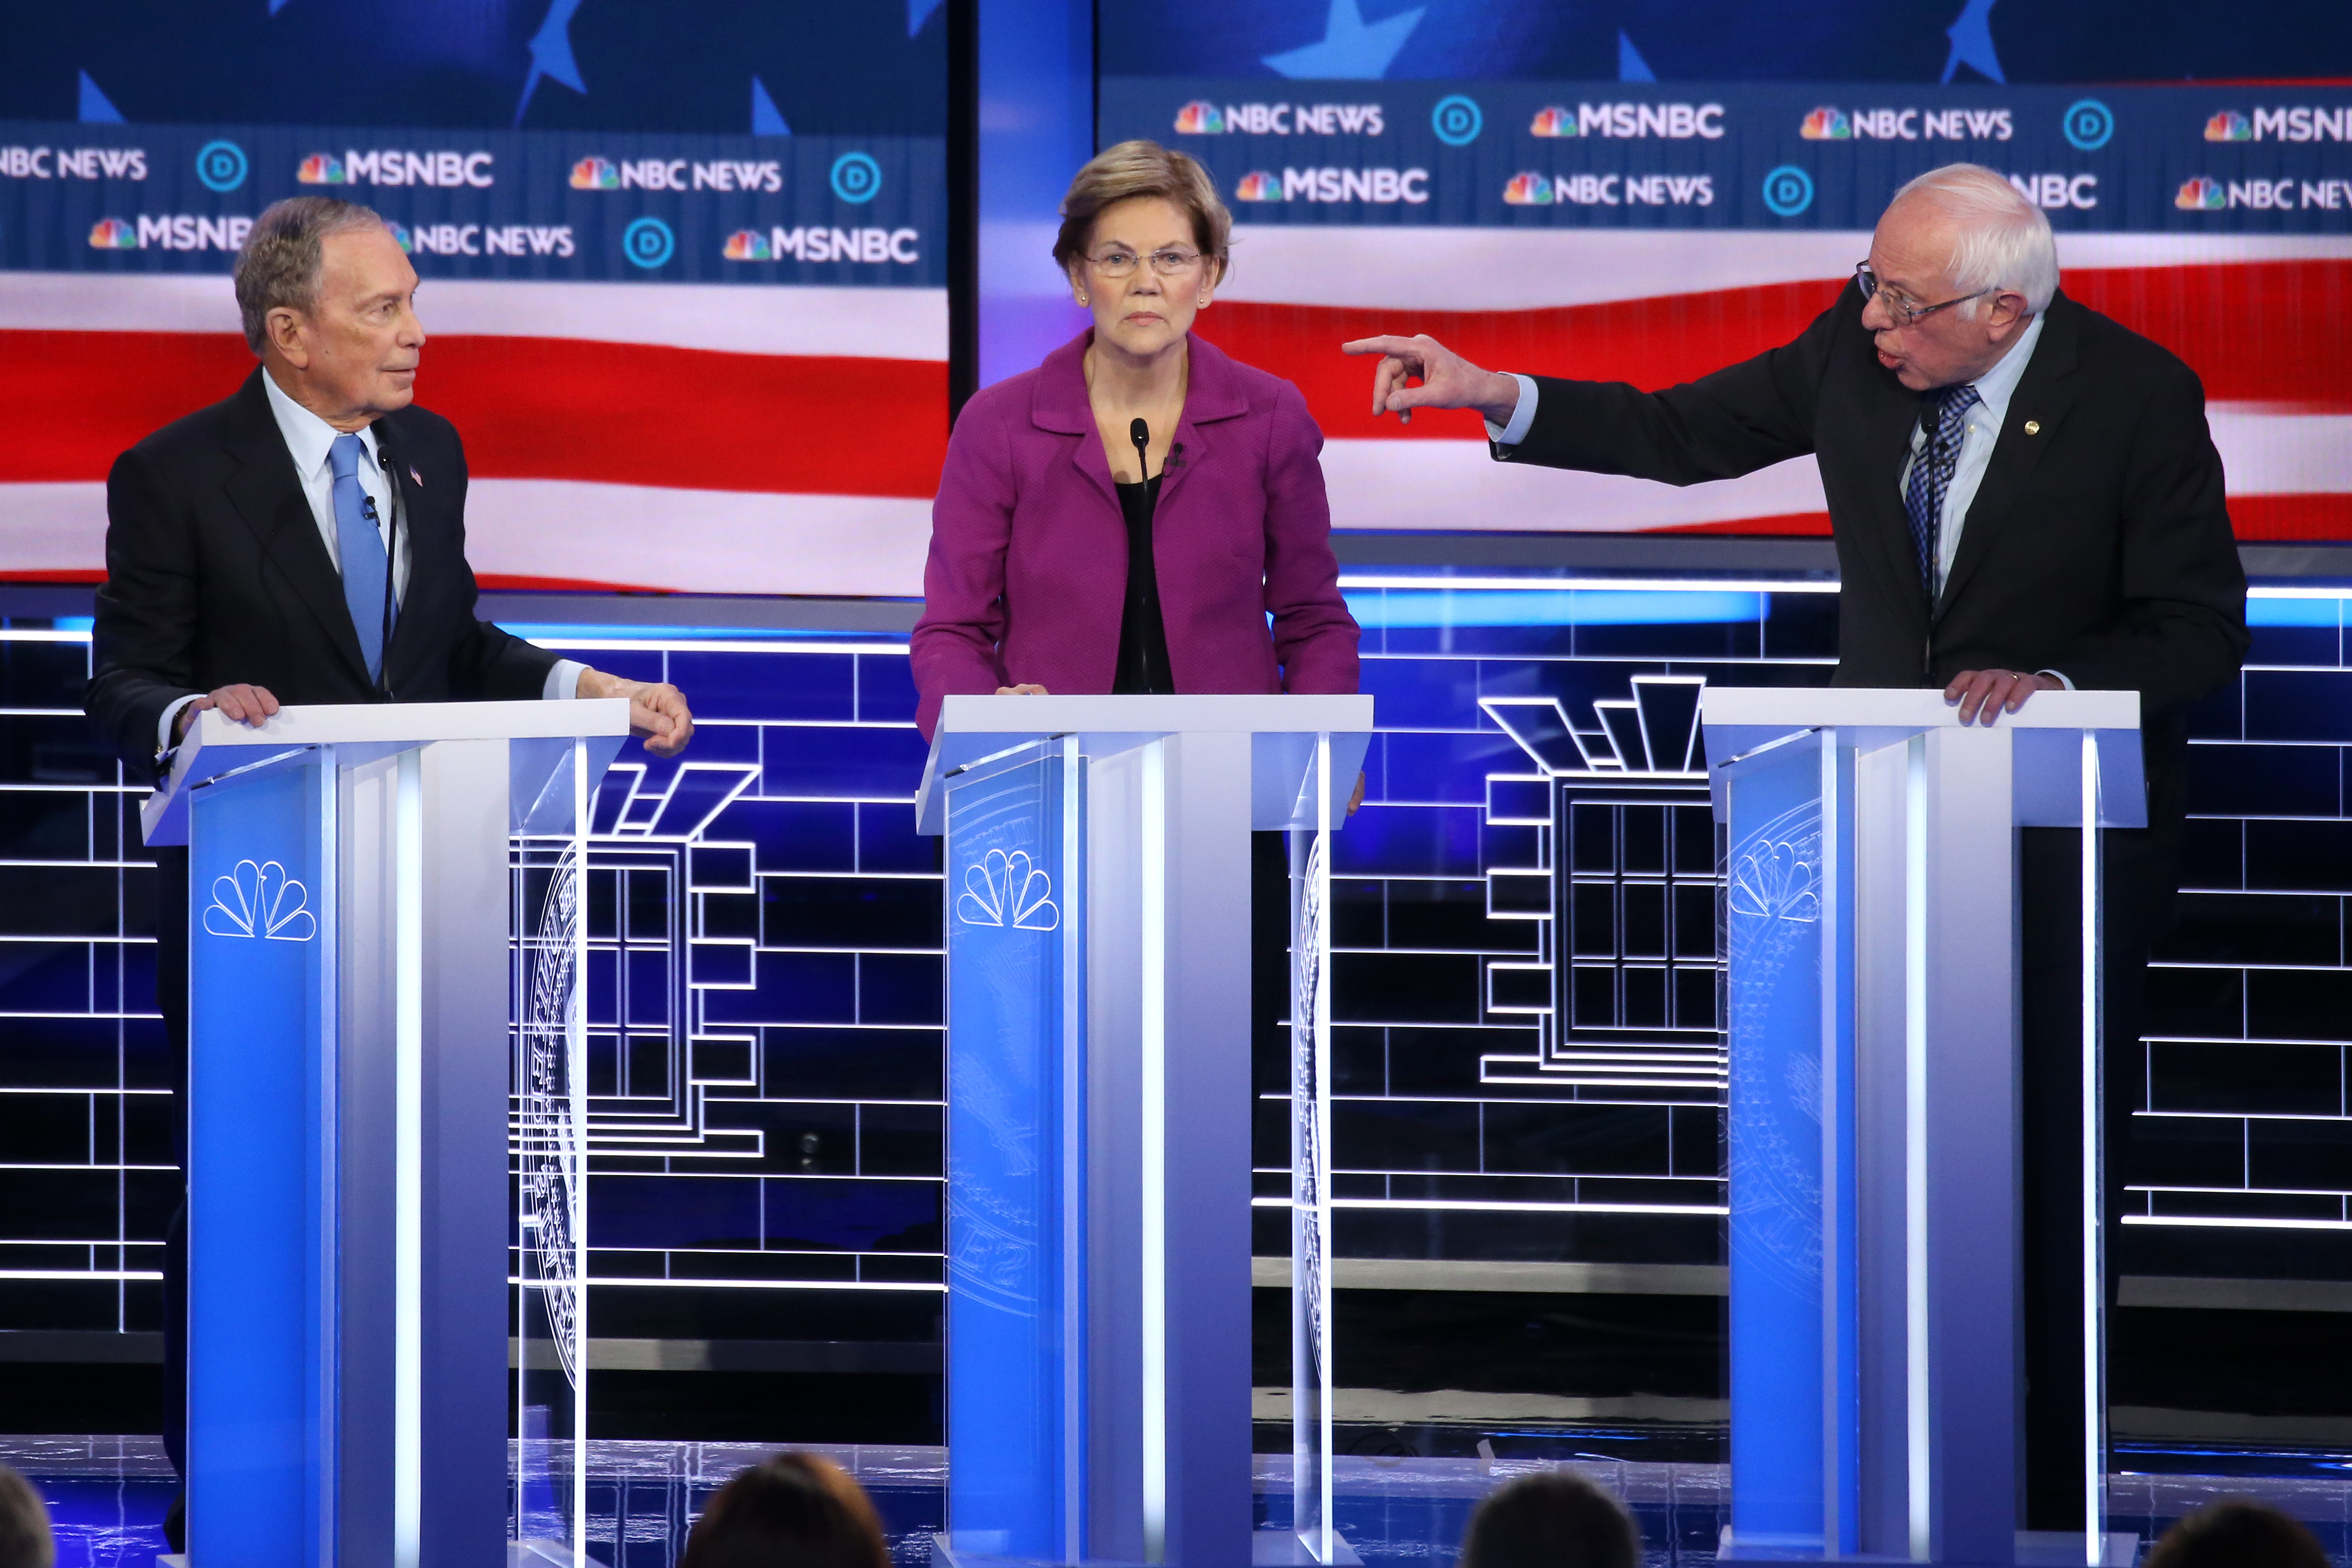 LAS VEGAS, NEVADA - FEBRUARY 19: Democratic presidential candidate Sen. Bernie Sanders (I-VT) (R) gestures as Sen. Elizabeth Warren (D-MA) and former New York City mayor Mike Bloomberg listen during the Democratic presidential primary debate at Paris Las Vegas on February 19, 2020 in Las Vegas, Nevada. Six candidates qualified for the third Democratic presidential primary debate of 2020, which comes just days before the Nevada caucuses on February 22. (Photo by Mario Tama/Getty Images)